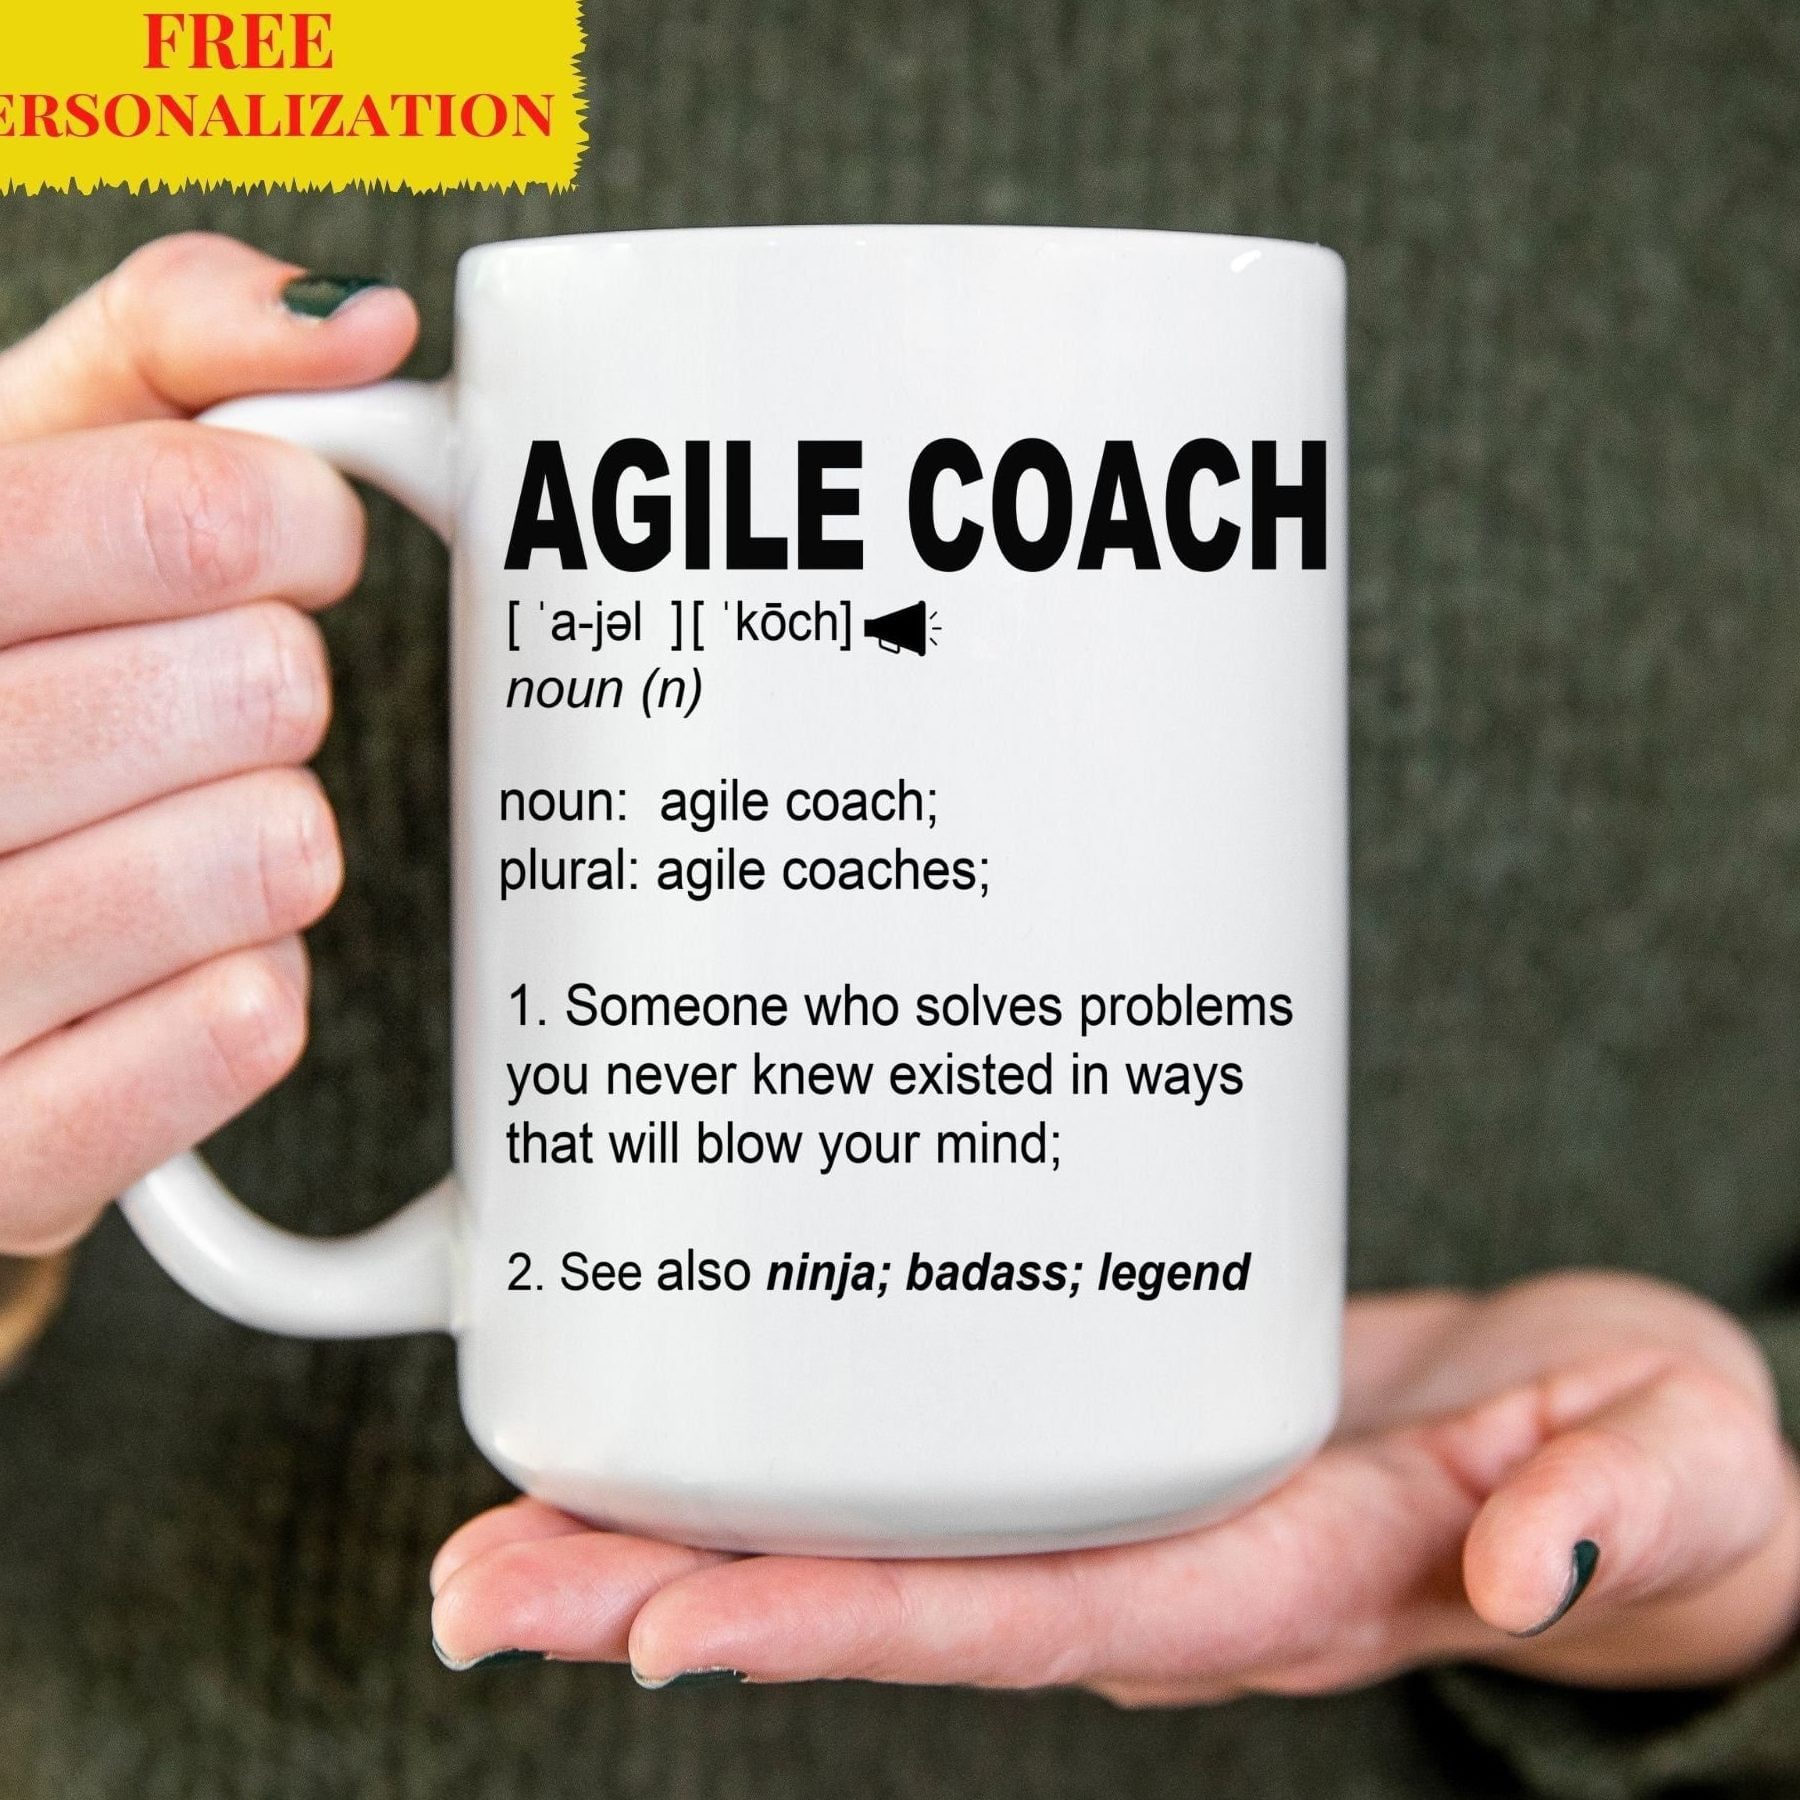 Agile Coach: Project management trainer who teaches the Agile methodology to corporate teams.